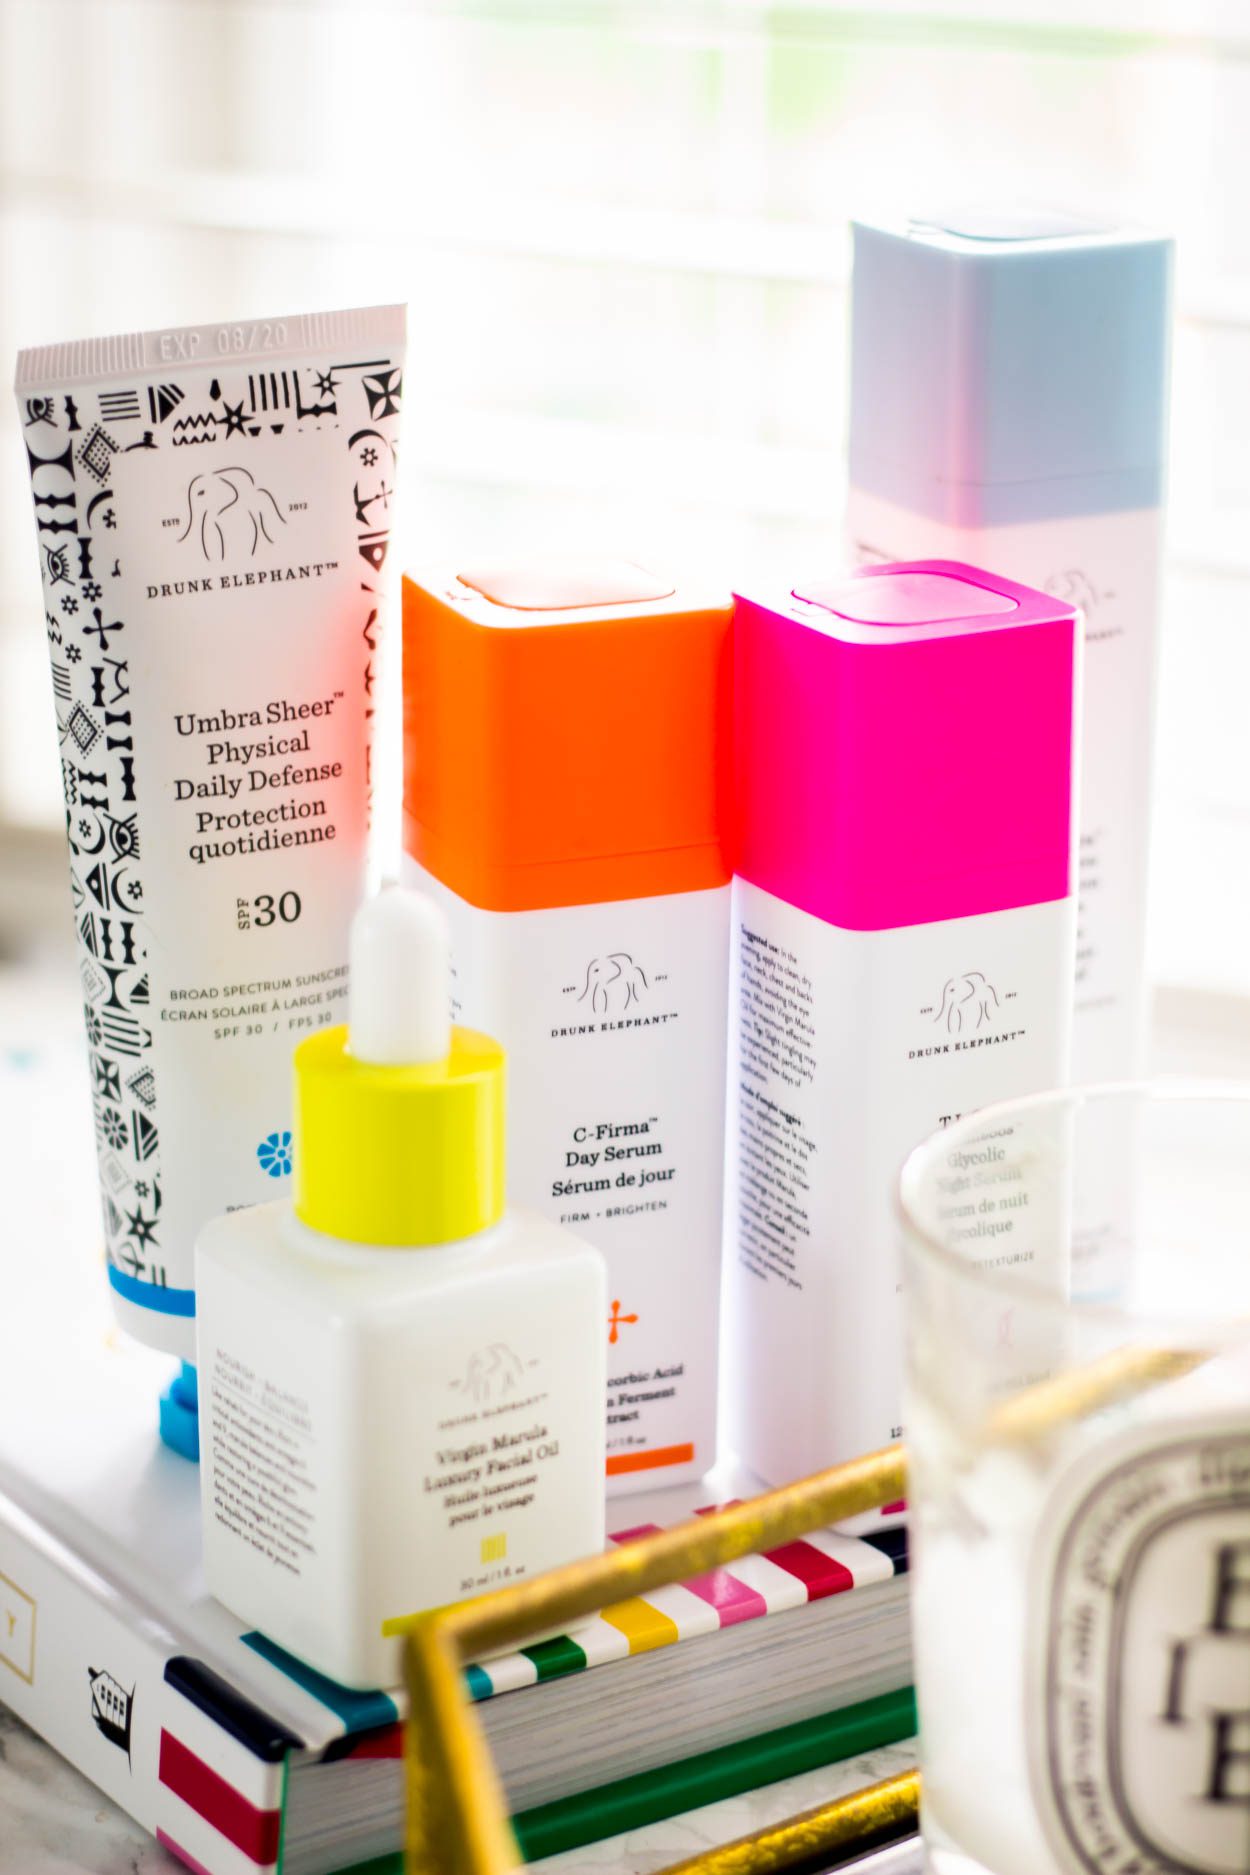 Drunk Elephant skincare is 20% off just in time for summer